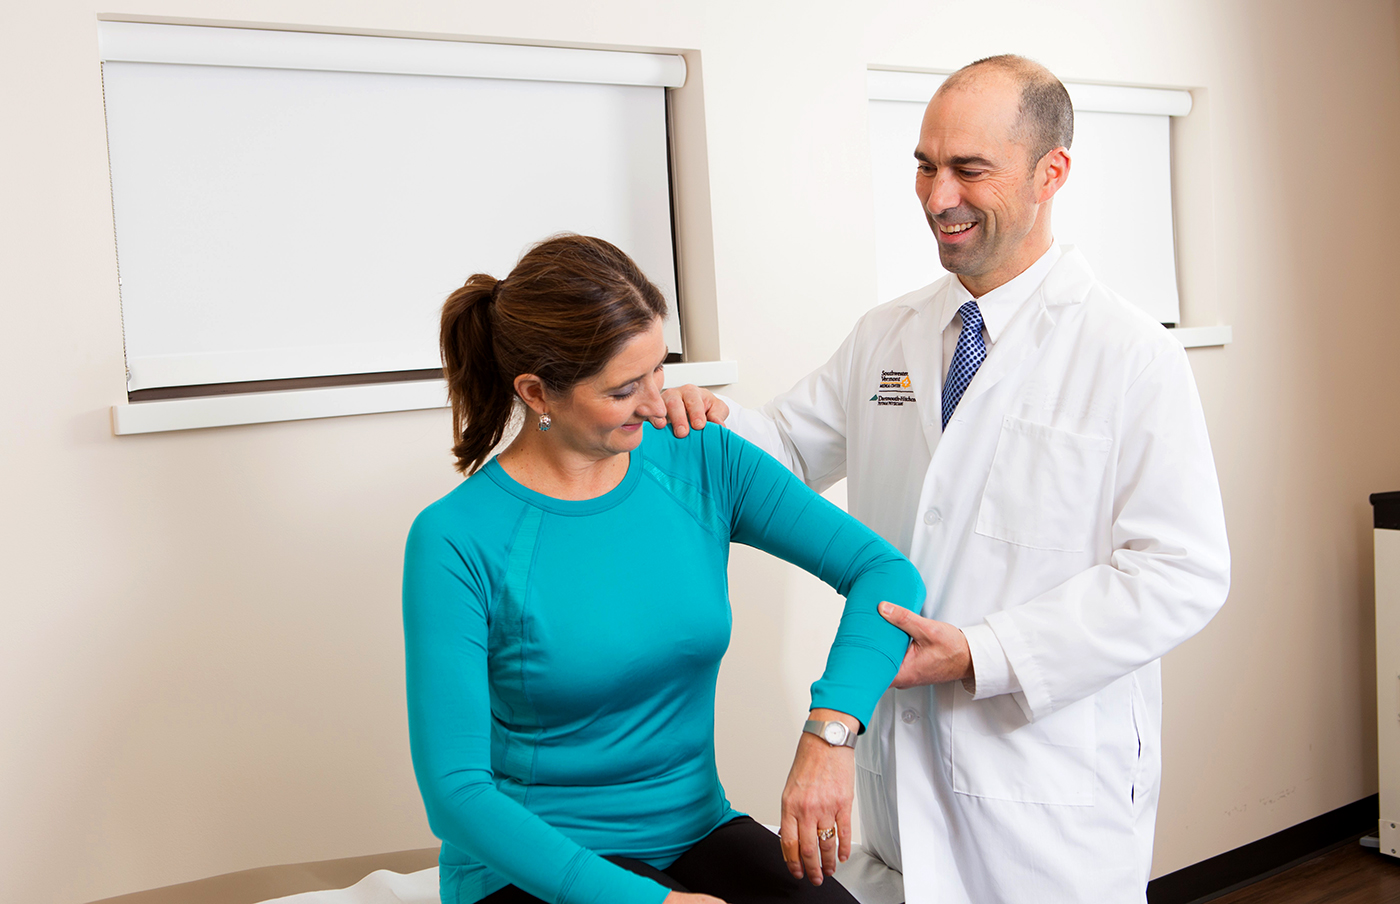 Provider examining a patient's arm in an examination room